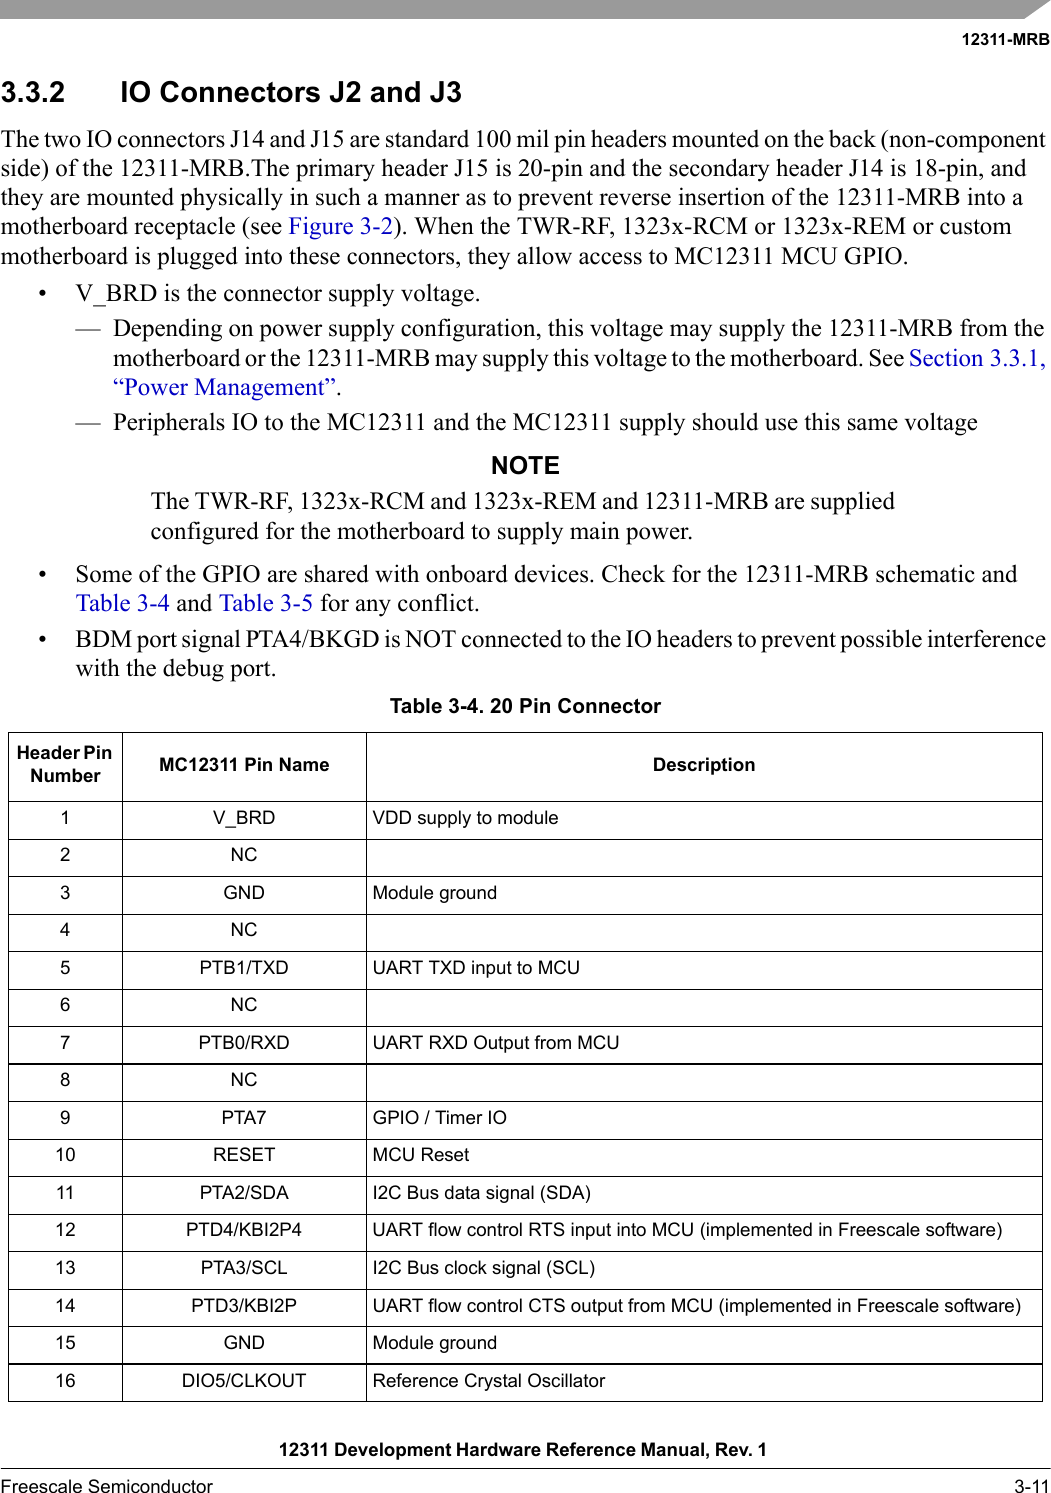 12311-MRB12311 Development Hardware Reference Manual, Rev. 1 Freescale Semiconductor 3-113.3.2 IO Connectors J2 and J3The two IO connectors J14 and J15 are standard 100 mil pin headers mounted on the back (non-component side) of the 12311-MRB.The primary header J15 is 20-pin and the secondary header J14 is 18-pin, and they are mounted physically in such a manner as to prevent reverse insertion of the 12311-MRB into a motherboard receptacle (see Figure 3-2). When the TWR-RF, 1323x-RCM or 1323x-REM or custom motherboard is plugged into these connectors, they allow access to MC12311 MCU GPIO.• V_BRD is the connector supply voltage.— Depending on power supply configuration, this voltage may supply the 12311-MRB from the motherboard or the 12311-MRB may supply this voltage to the motherboard. See Section 3.3.1, “Power Management”.— Peripherals IO to the MC12311 and the MC12311 supply should use this same voltageNOTEThe TWR-RF, 1323x-RCM and 1323x-REM and 12311-MRB are supplied configured for the motherboard to supply main power.• Some of the GPIO are shared with onboard devices. Check for the 12311-MRB schematic and Table 3-4 and Table 3-5 for any conflict.• BDM port signal PTA4/BKGD is NOT connected to the IO headers to prevent possible interference with the debug port.Table 3-4. 20 Pin ConnectorHeader Pin Number MC12311 Pin Name Description1 V_BRD VDD supply to module2NC3 GND Module ground4NC5 PTB1/TXD UART TXD input to MCU6NC7 PTB0/RXD UART RXD Output from MCU8NC9 PTA7 GPIO / Timer IO10 RESET MCU Reset11 PTA2/SDA I2C Bus data signal (SDA)12 PTD4/KBI2P4 UART flow control RTS input into MCU (implemented in Freescale software)13 PTA3/SCL I2C Bus clock signal (SCL)14 PTD3/KBI2P UART flow control CTS output from MCU (implemented in Freescale software)15 GND Module ground16 DIO5/CLKOUT Reference Crystal Oscillator